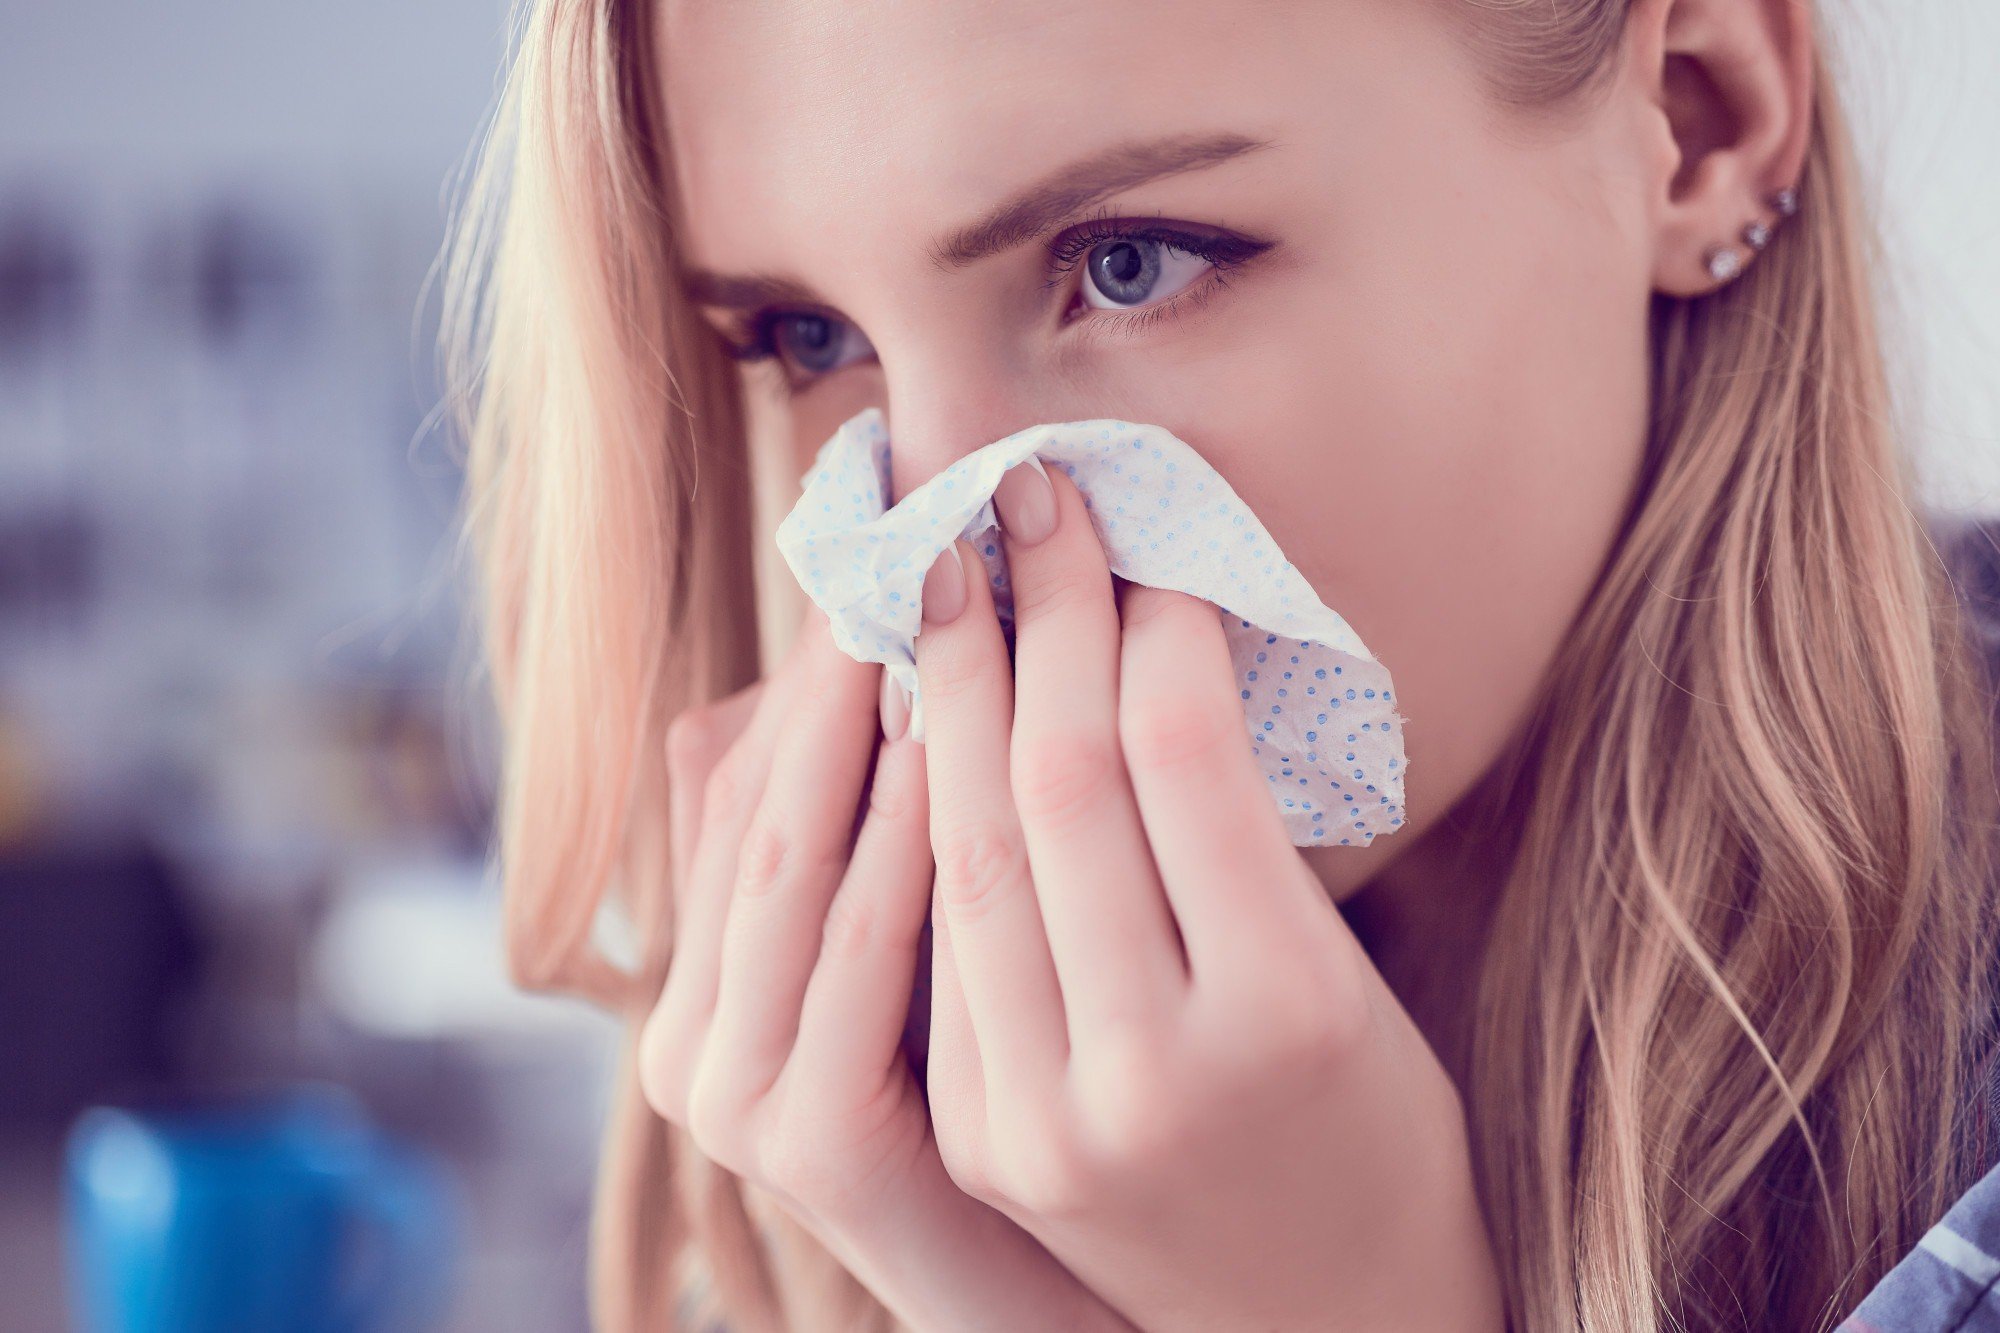 Allergic to Mold? Here Are 5 Common Symptoms of Mold Allergies